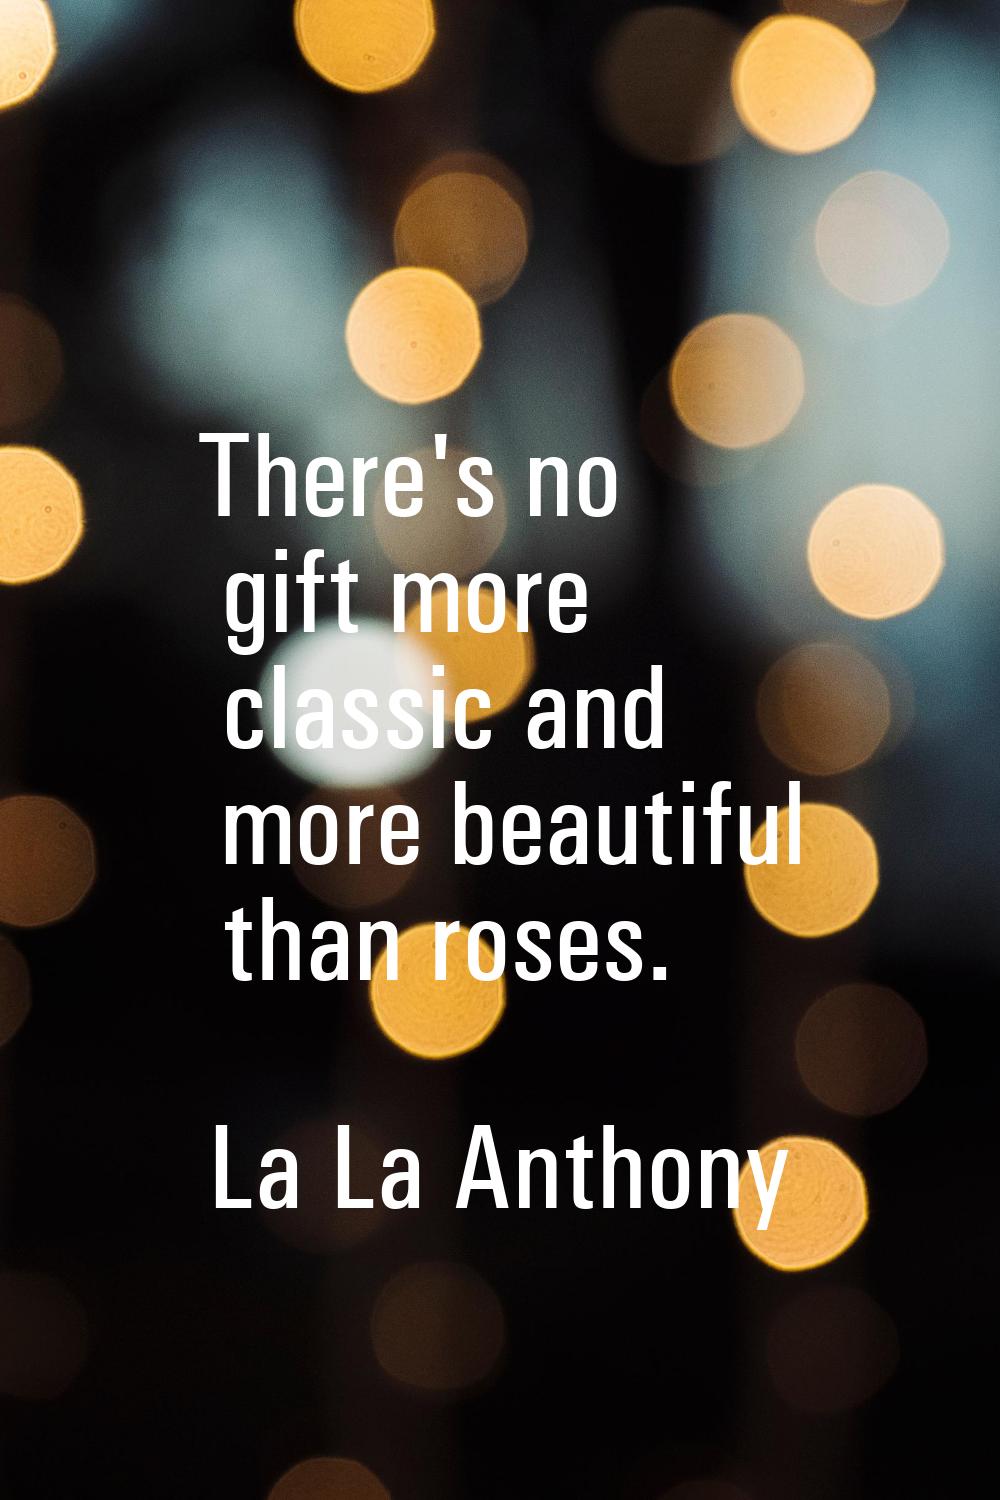 There's no gift more classic and more beautiful than roses.